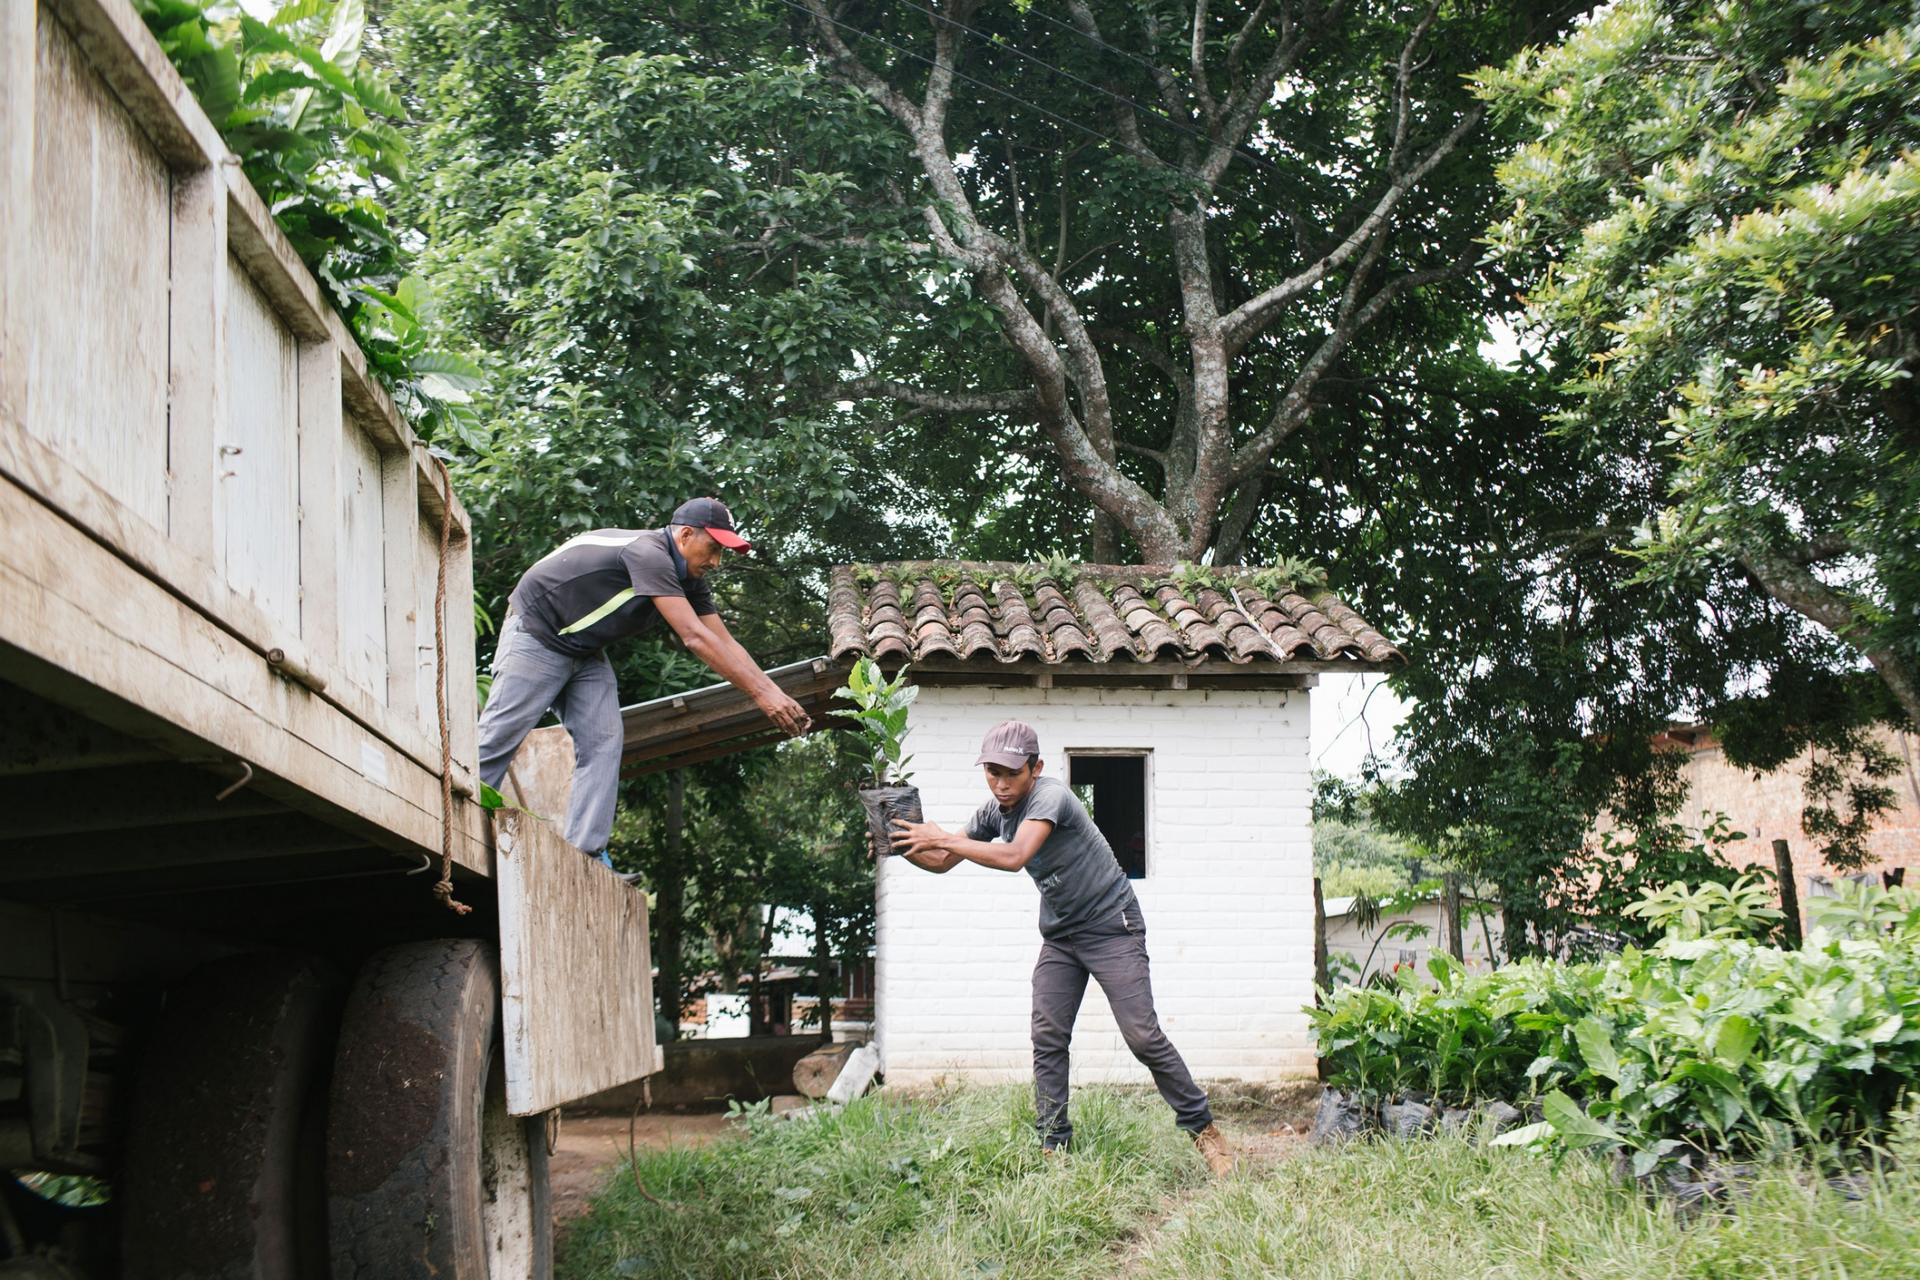 Two coffee workers are shown unloading small plants from the back of a truck.